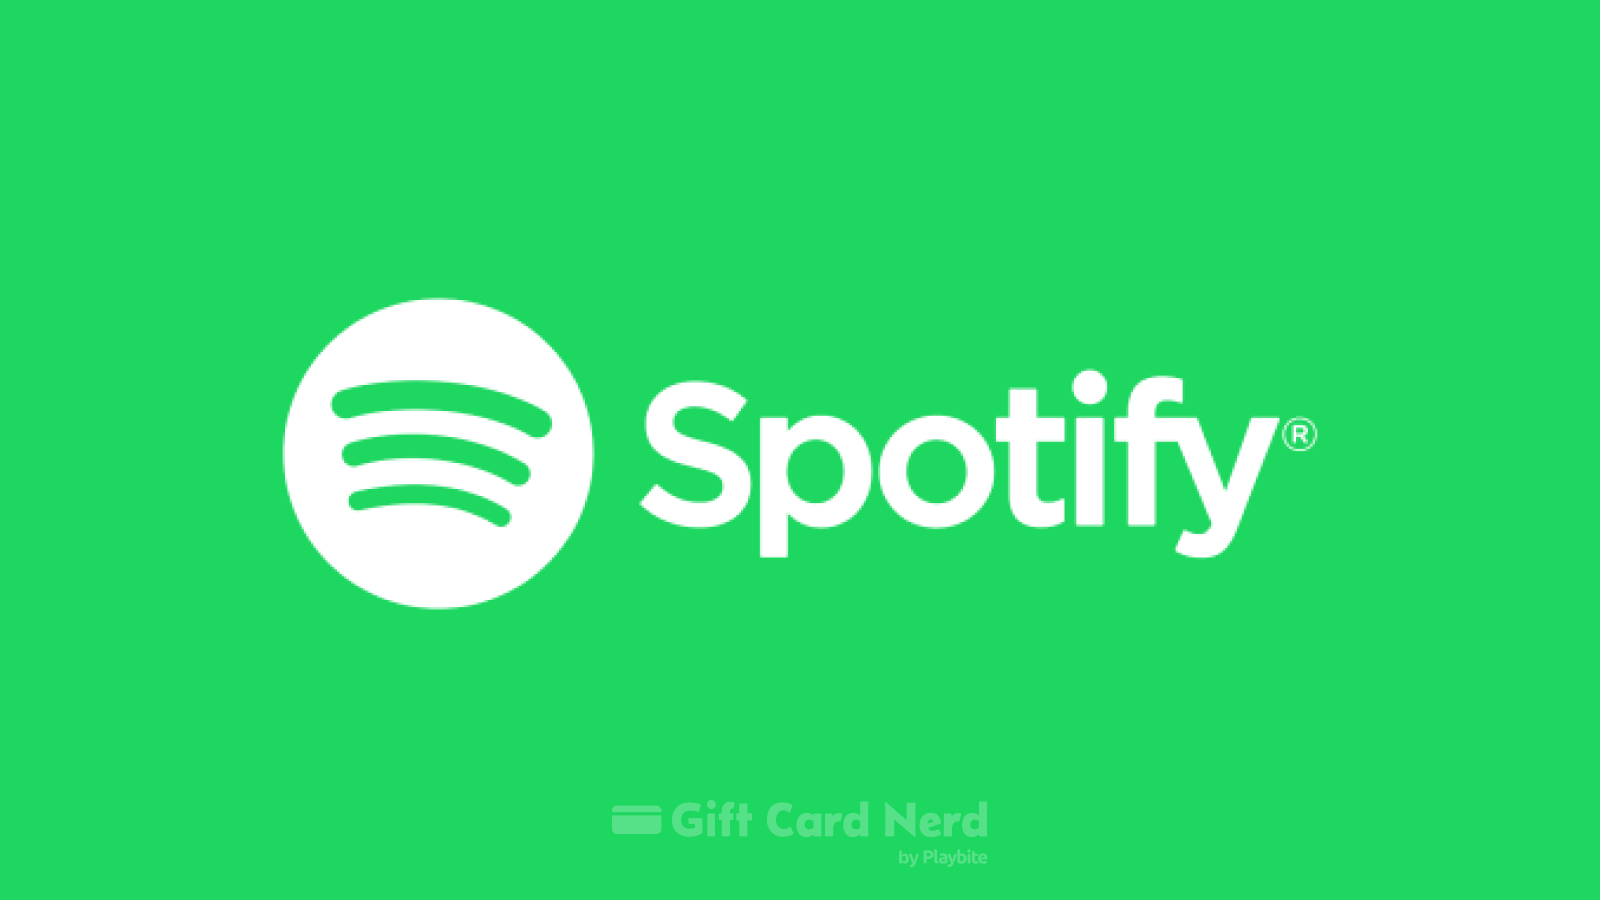 Where to Buy Spotify Gift Cards: Target Edition